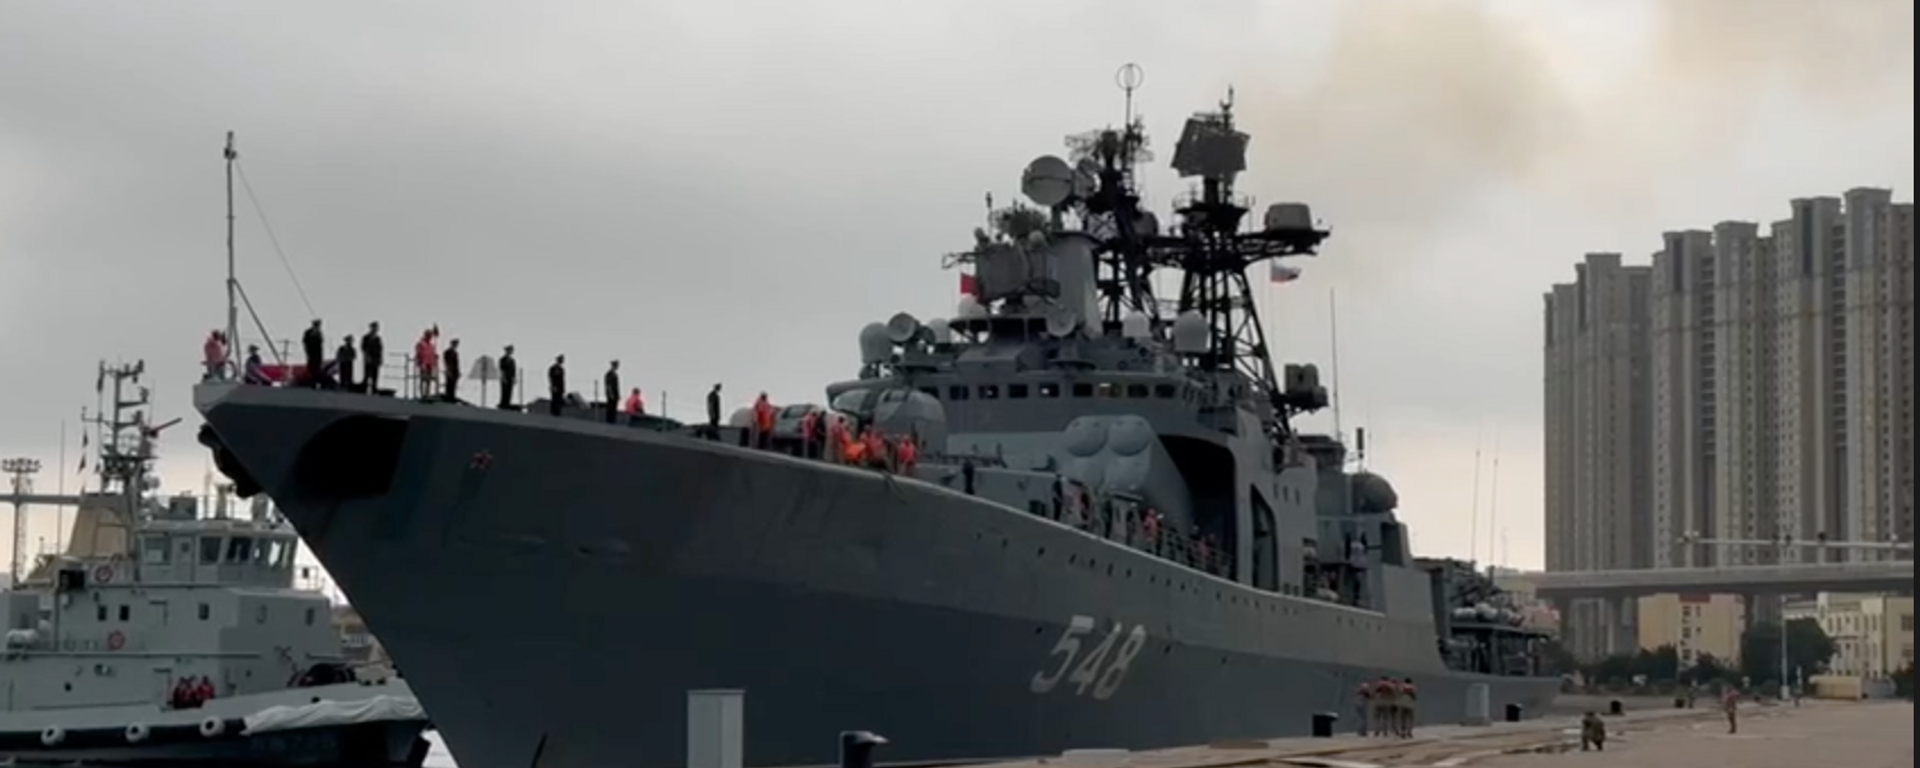 A detachment of the Russian Navy’s Pacific Fleet ships entered the port of Qingdao, China after more than three weeks of joint patrols in the Pacific Ocean - Sputnik International, 1920, 21.08.2023